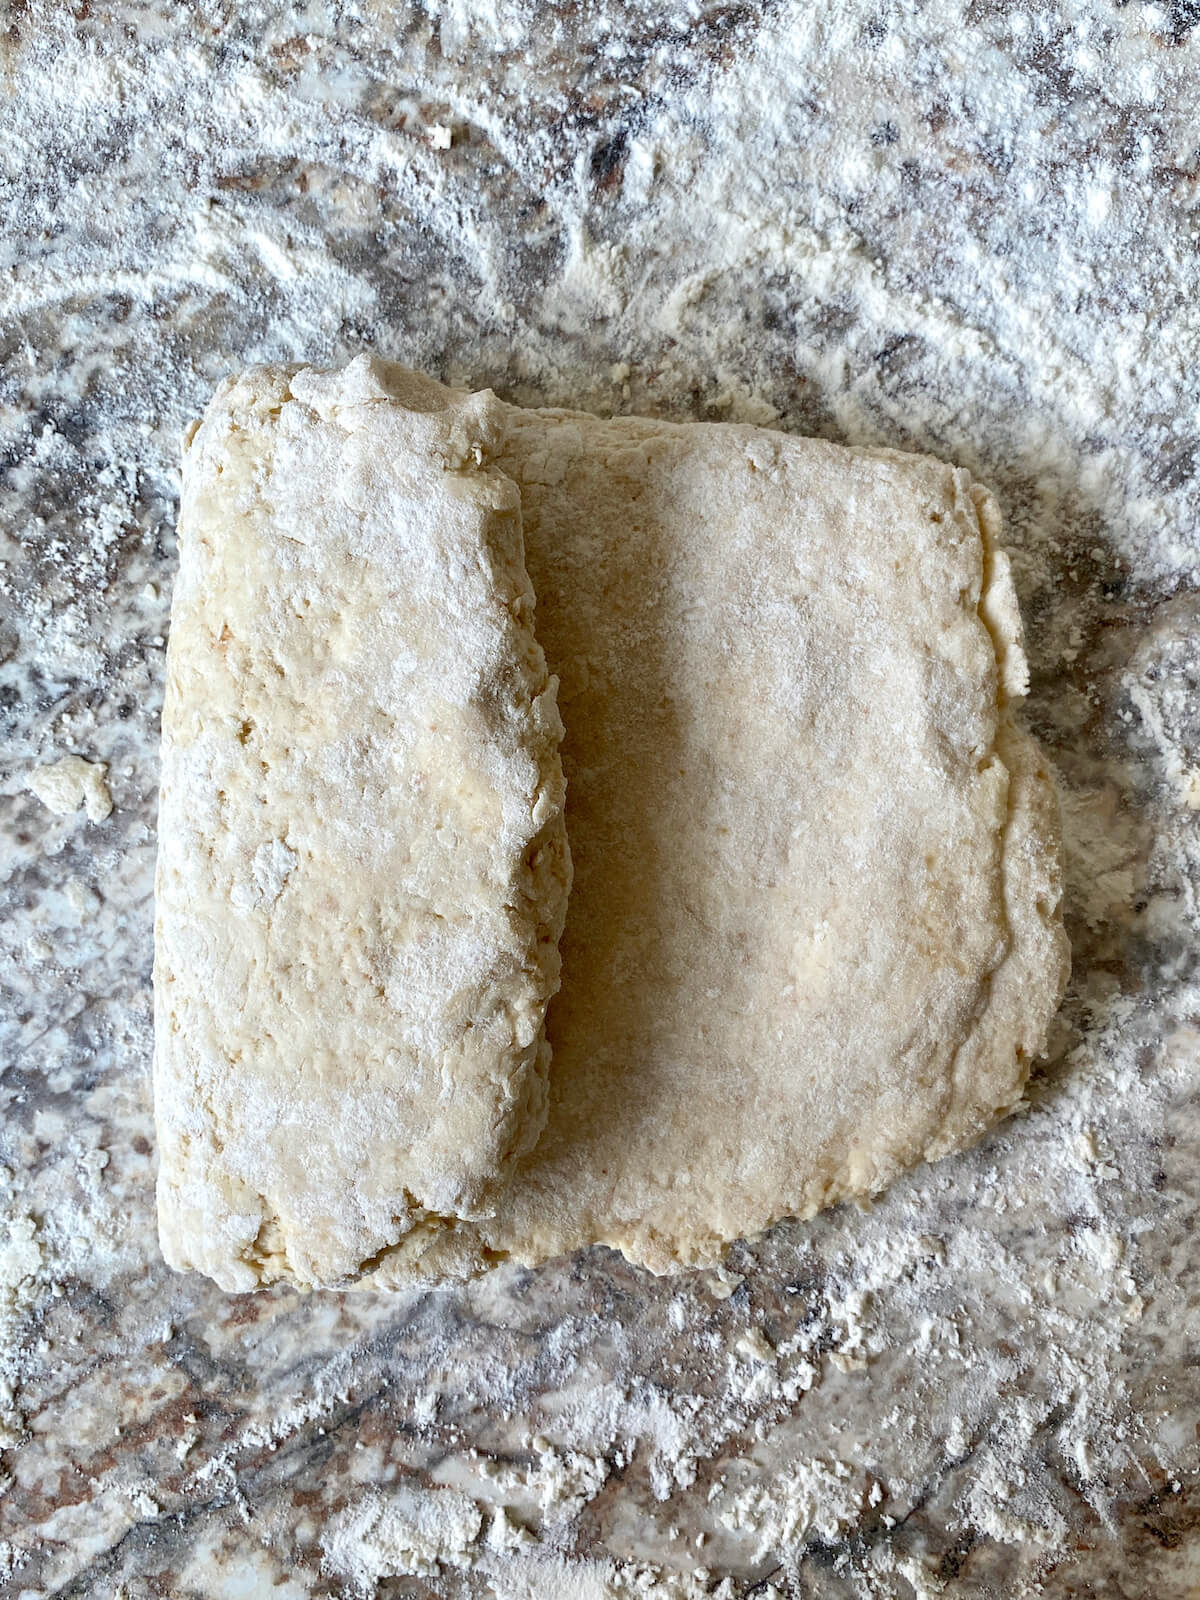 The biscuit dough rectangle with one side folded into the middle.